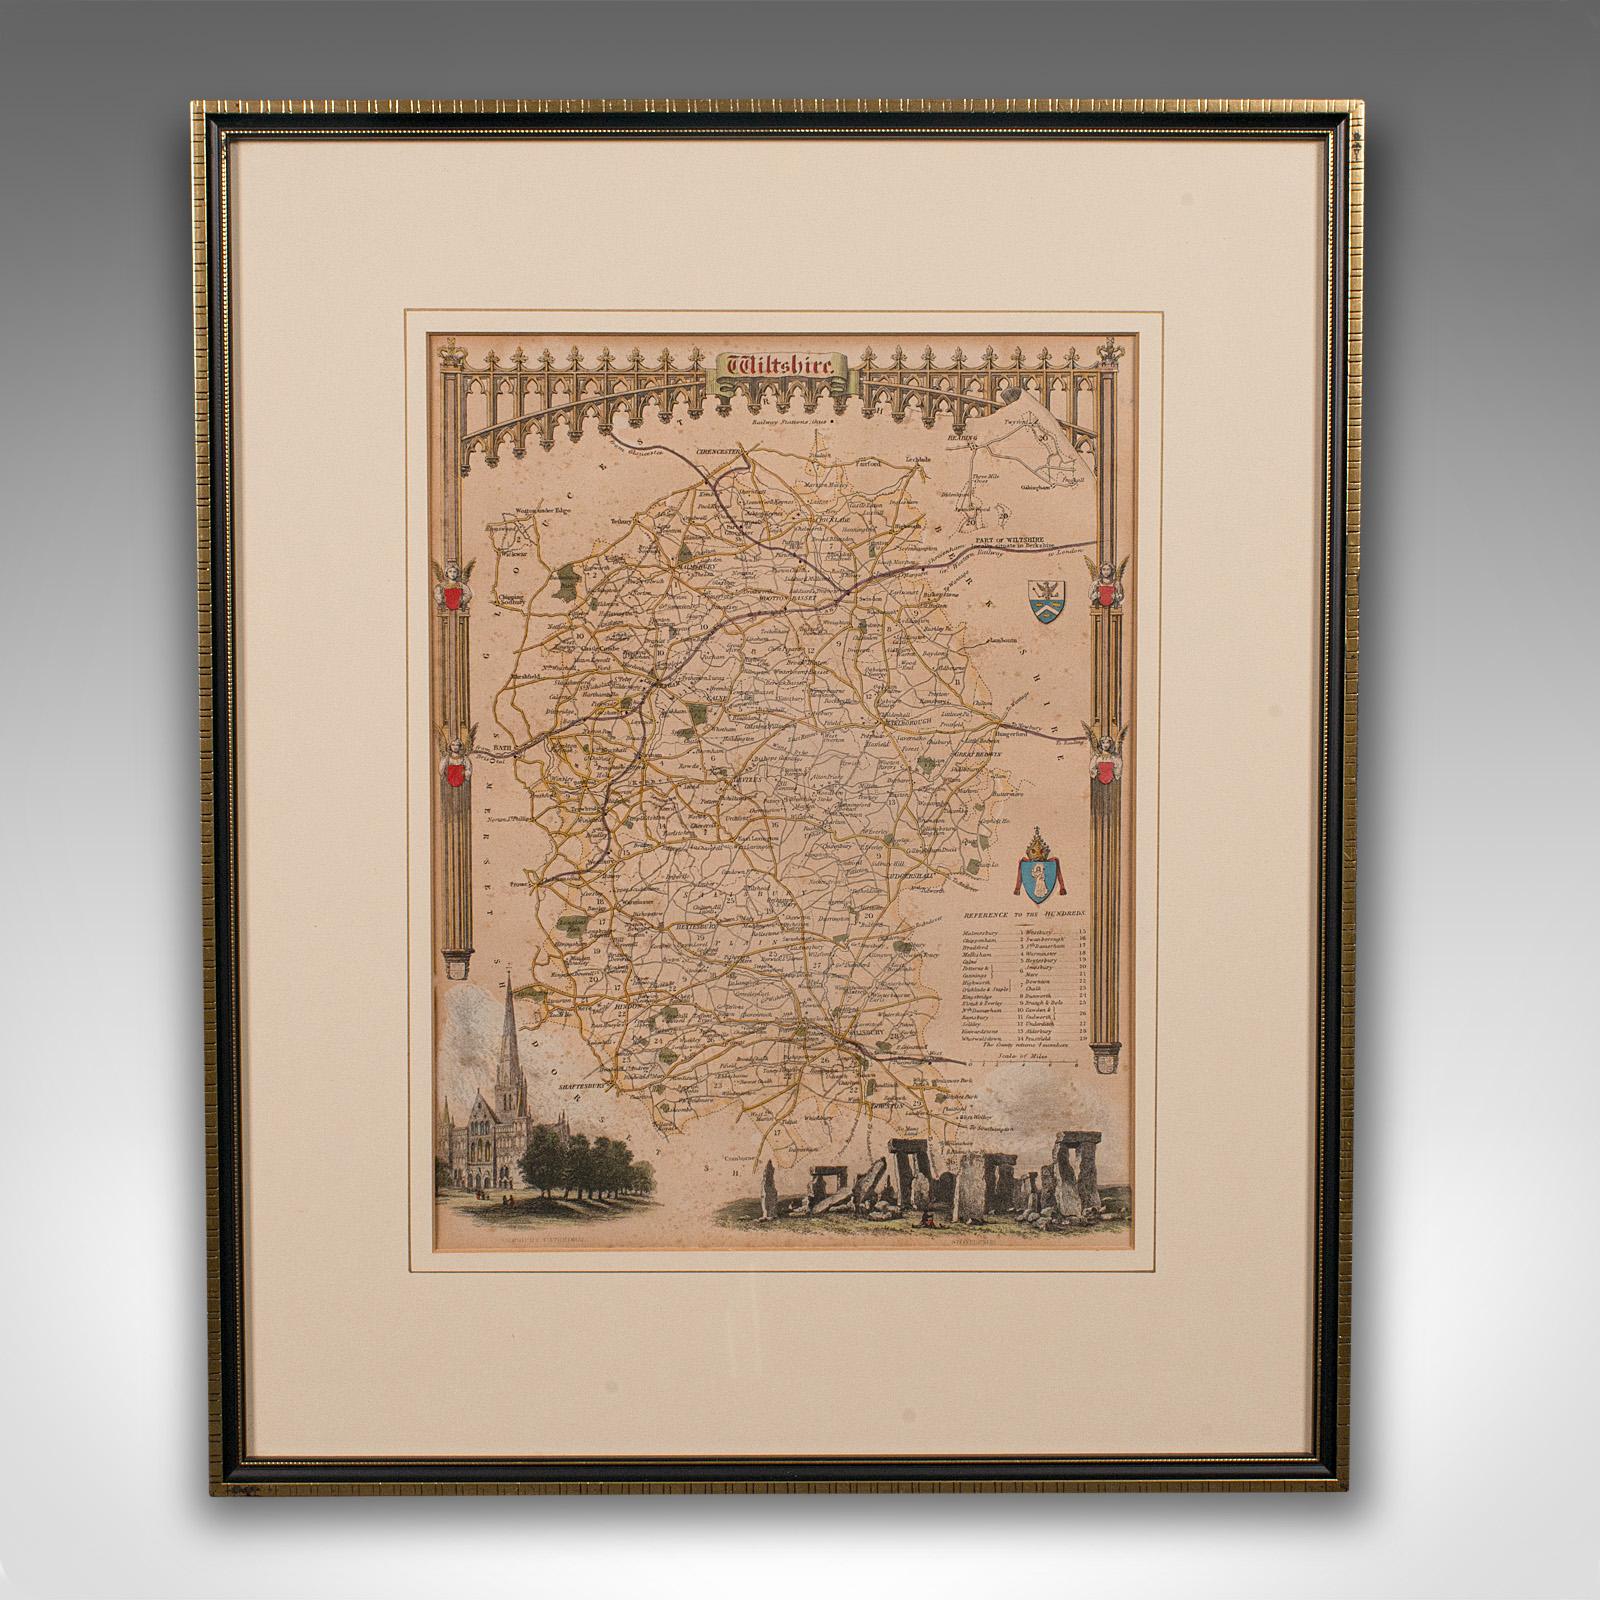 This is an antique lithography map of Wiltshire. An English, framed atlas engraving of cartographic interest, dating to the early 19th century and later.

Superb lithography of Wiltshire and its county detail, perfect for display
Displaying a